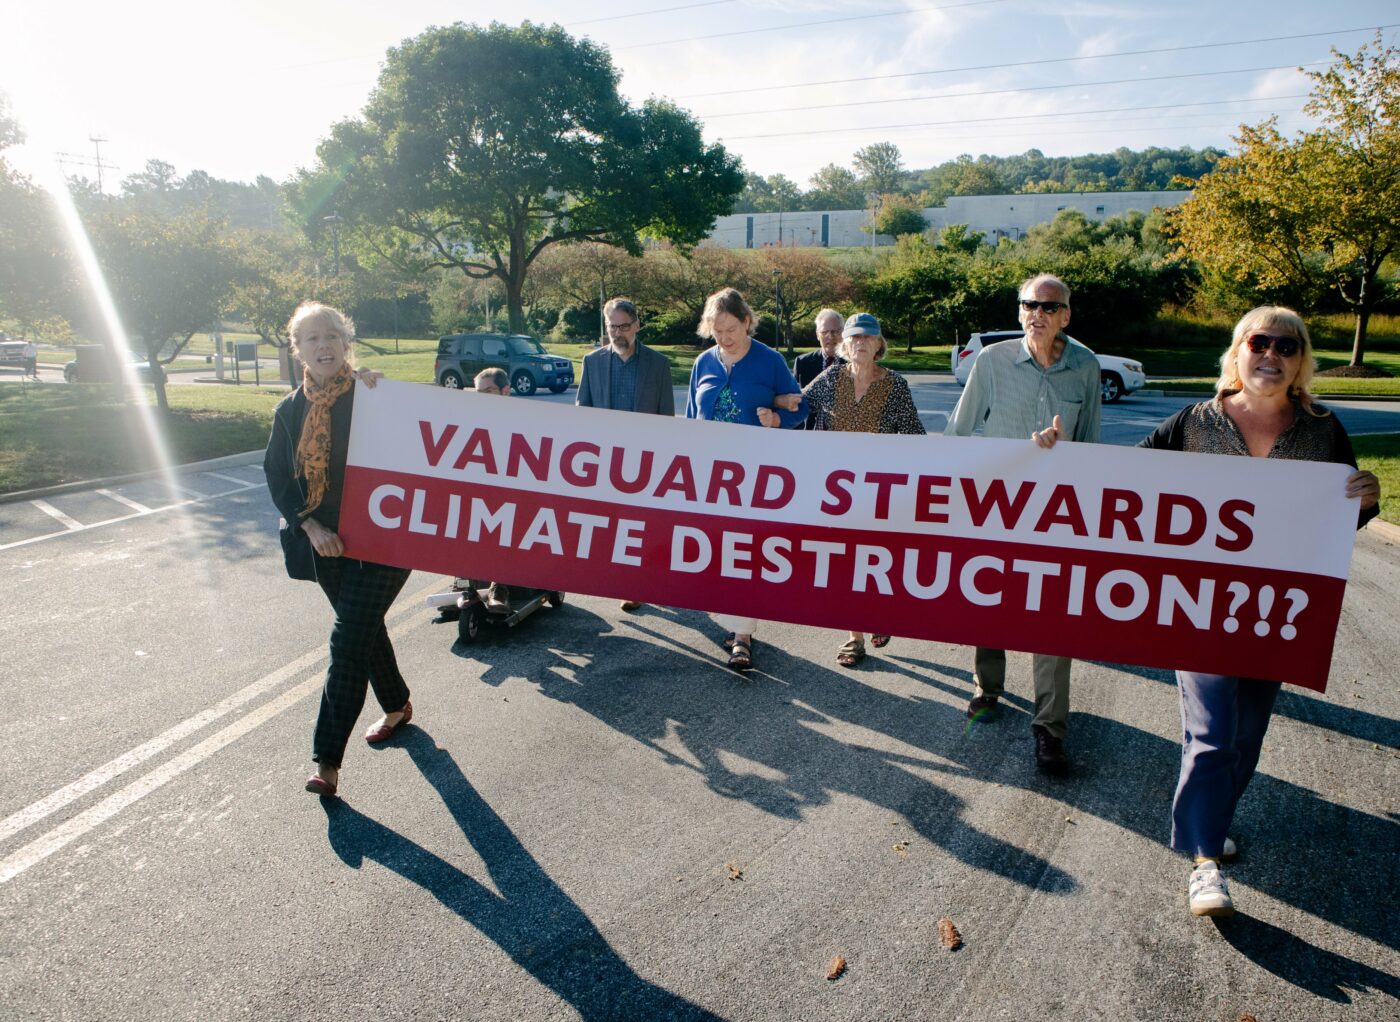 a group of people hold a large red and white banner that reads "Vanguard stewards climate destruction" outside of Vanguard's headquarters